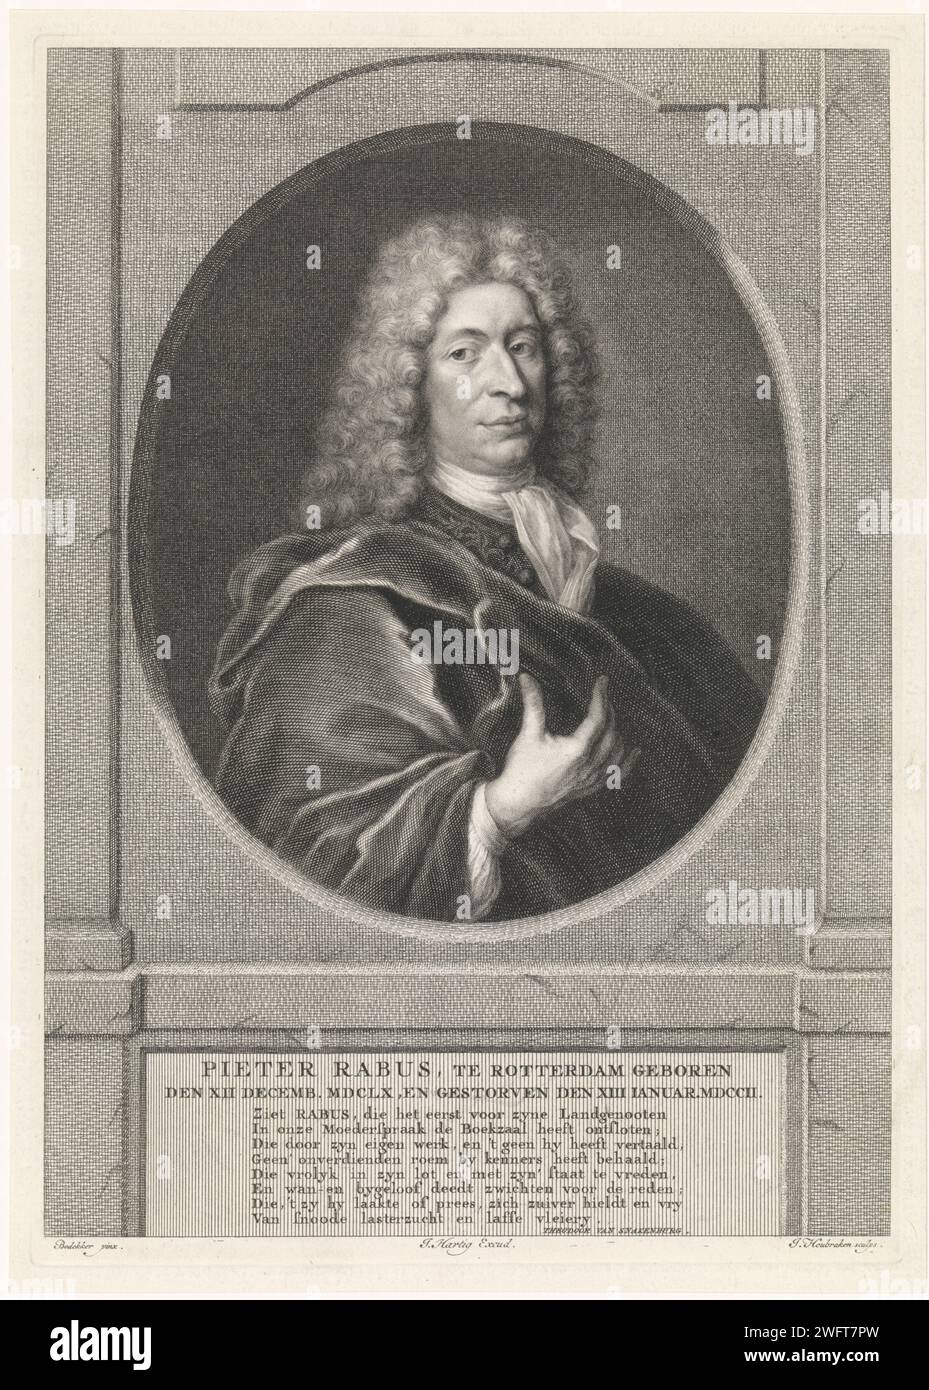 Portrait of Pieter Rabus, Jacob Houbraken, after Johann Friedrich Bodecker, 1736 - 1759 print Bust to the right of Pieter Rabus in an oval architectural window. Under the portrait, name and data in two lines in Latin are an eight -line verse in Dutch. Amsterdam paper engraving / etching Stock Photo